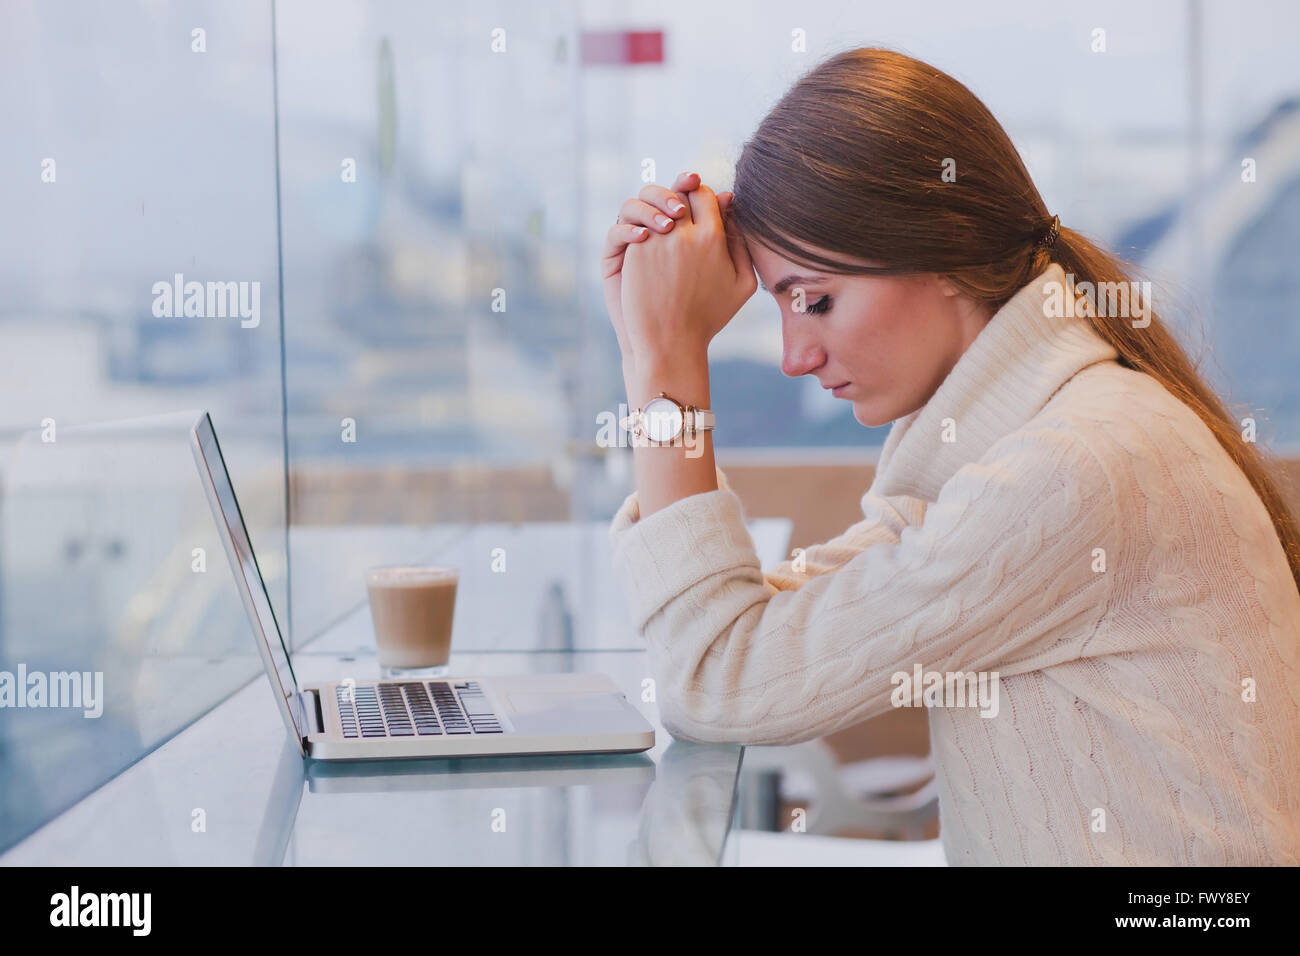 unemployment concept, problem, sad tired woman in front of laptop in modern bright cafe interior Stock Photo